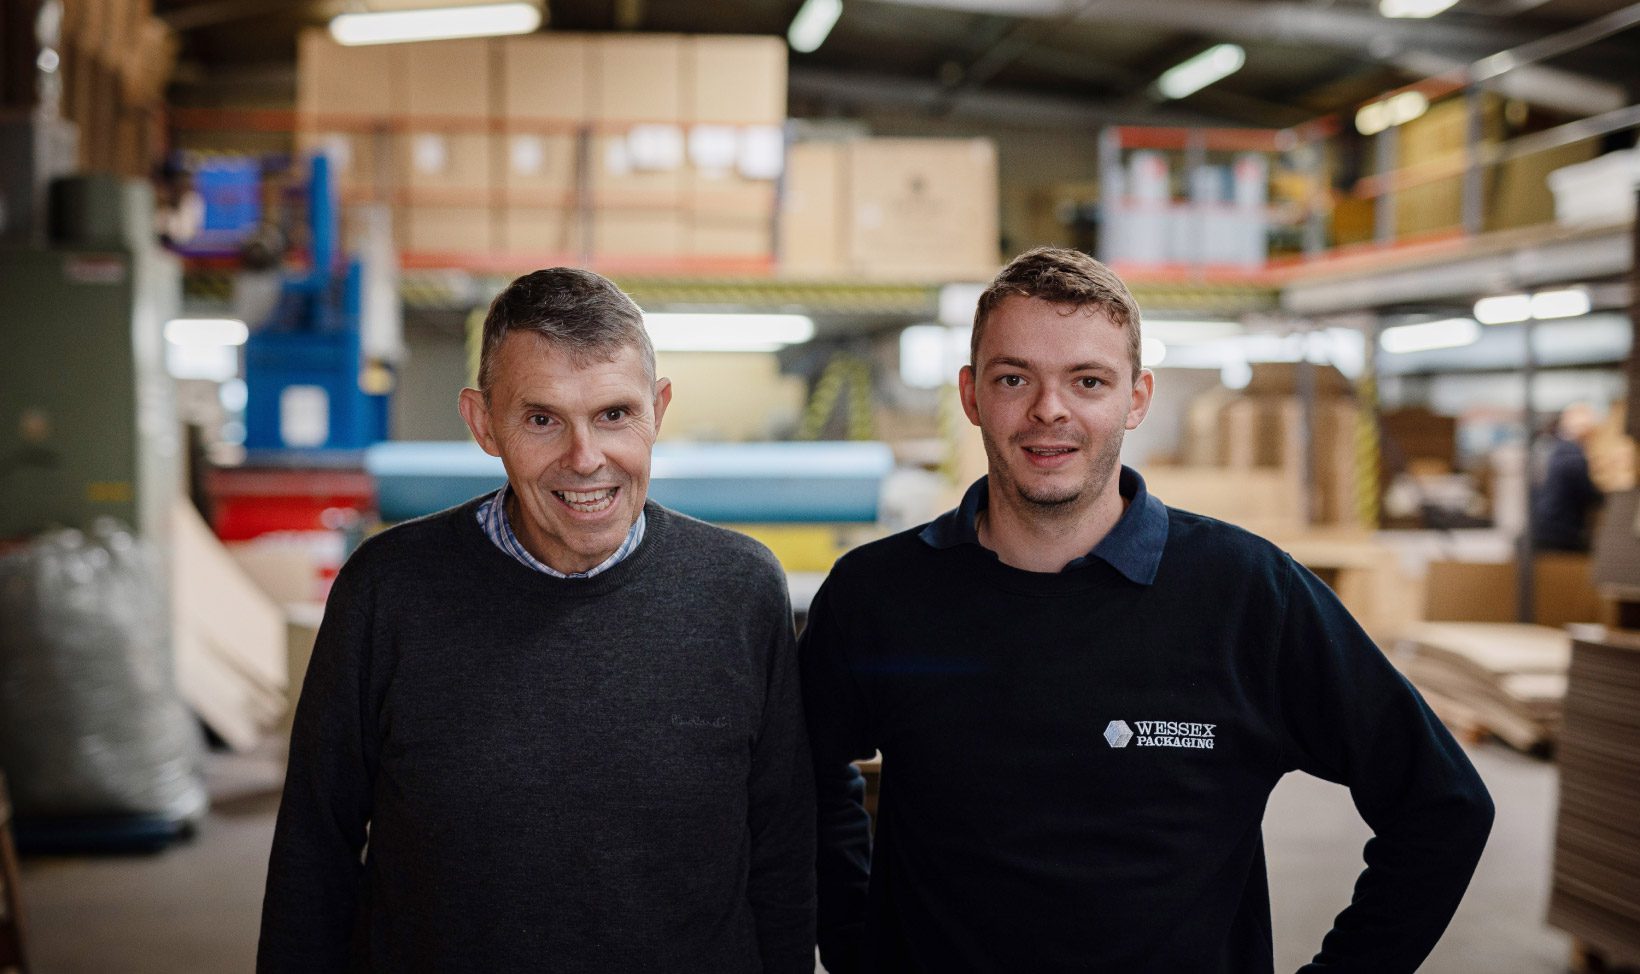 Get to know the Wessex Packaging team